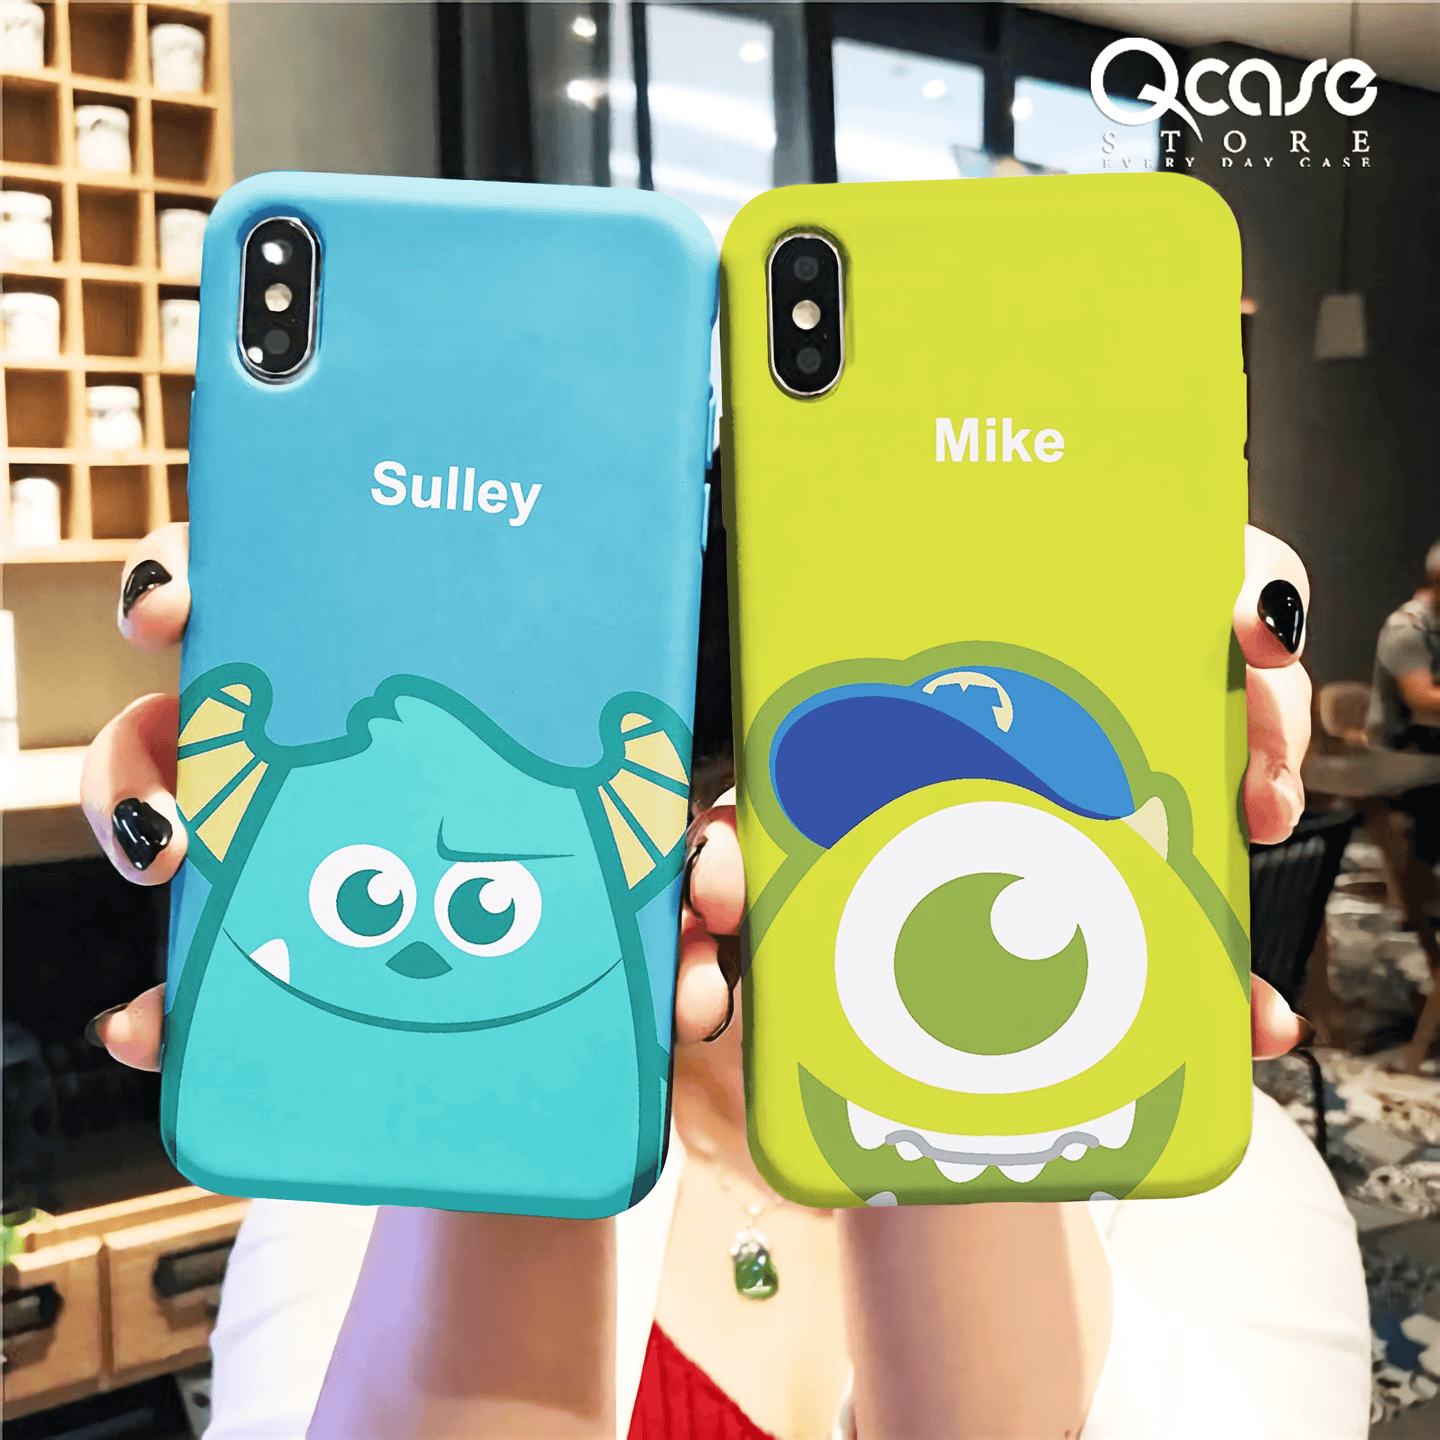 Sulley And Mike (Mared Washweshny and Shalaby) Phone Covers